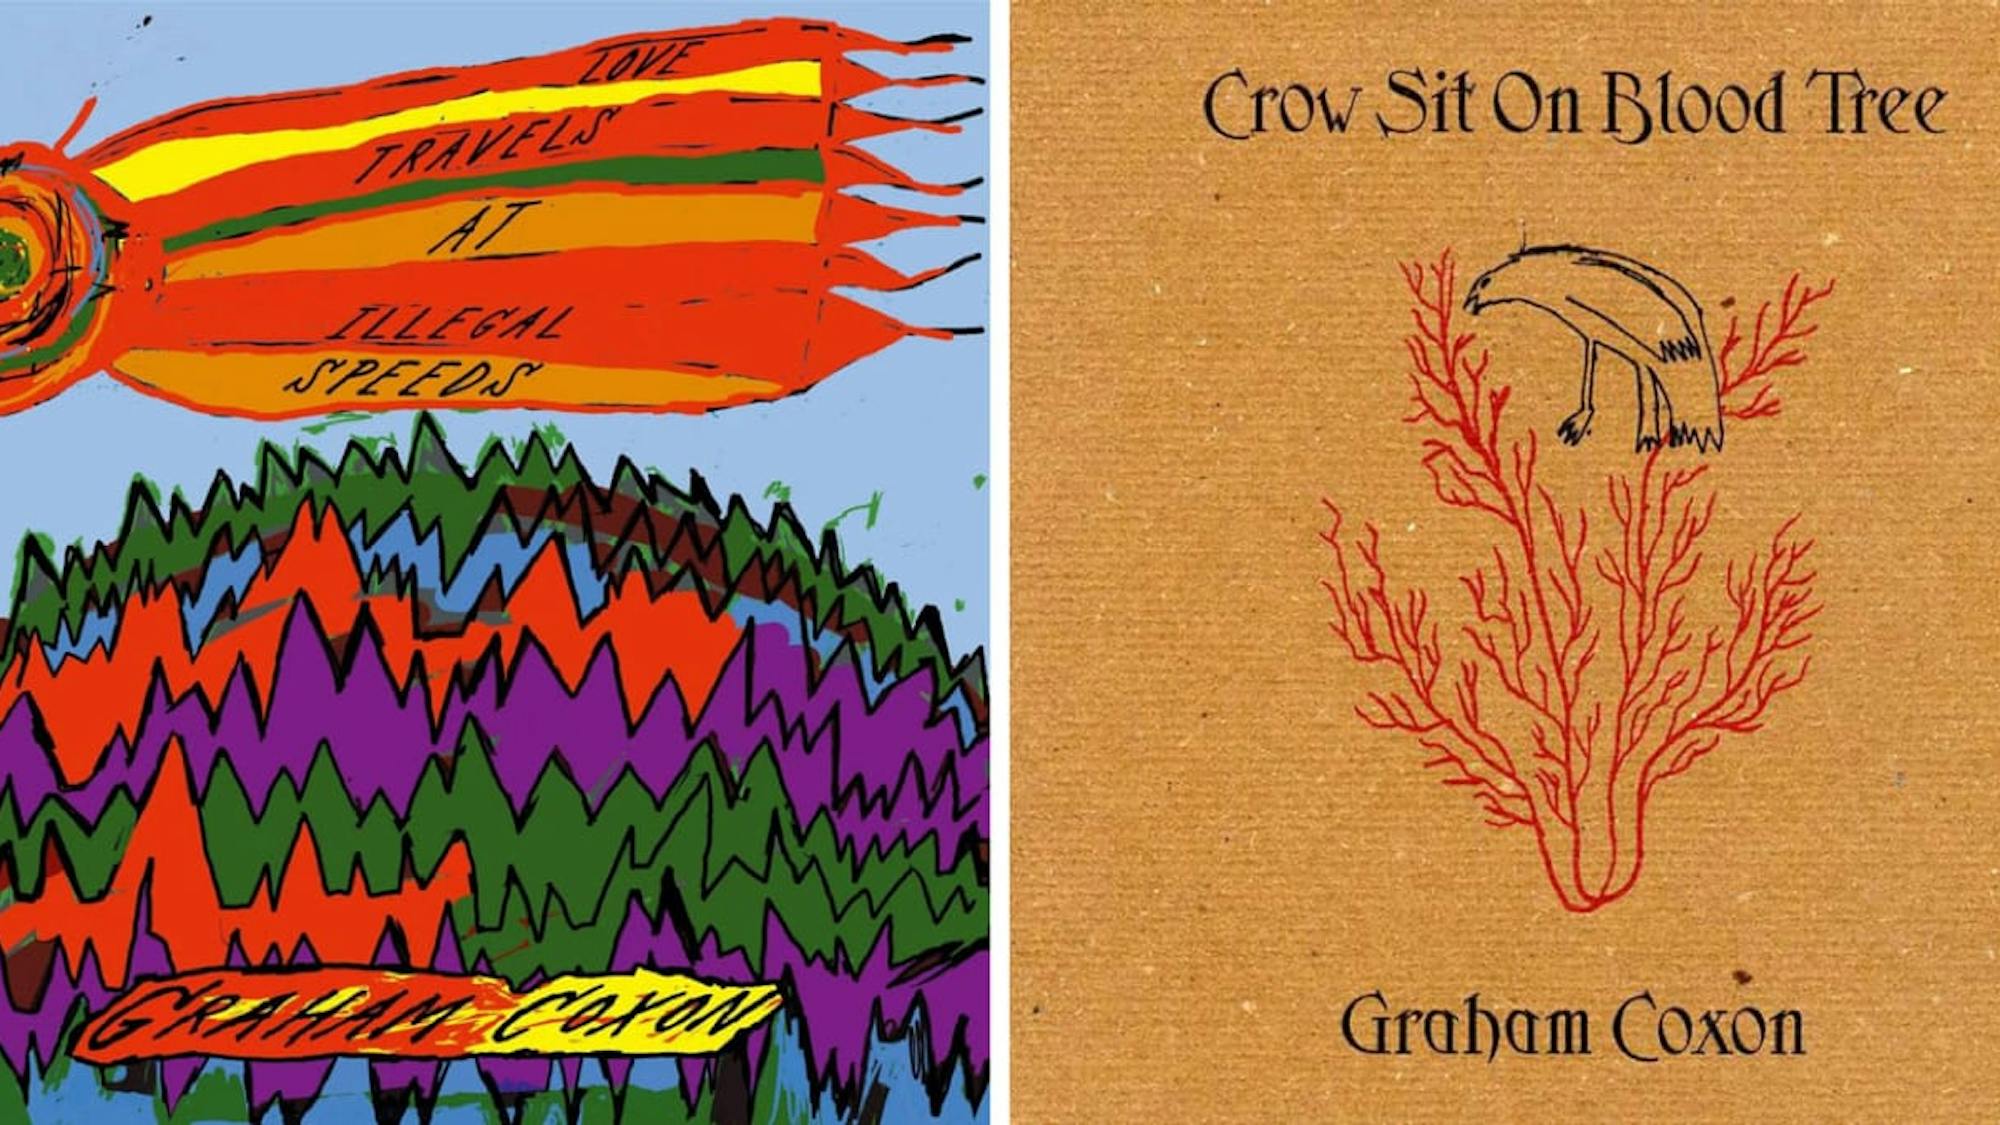 Love Travels at Llegal Speeds and Crow Sit on Blood Tree, solo albums by Graham Coxon